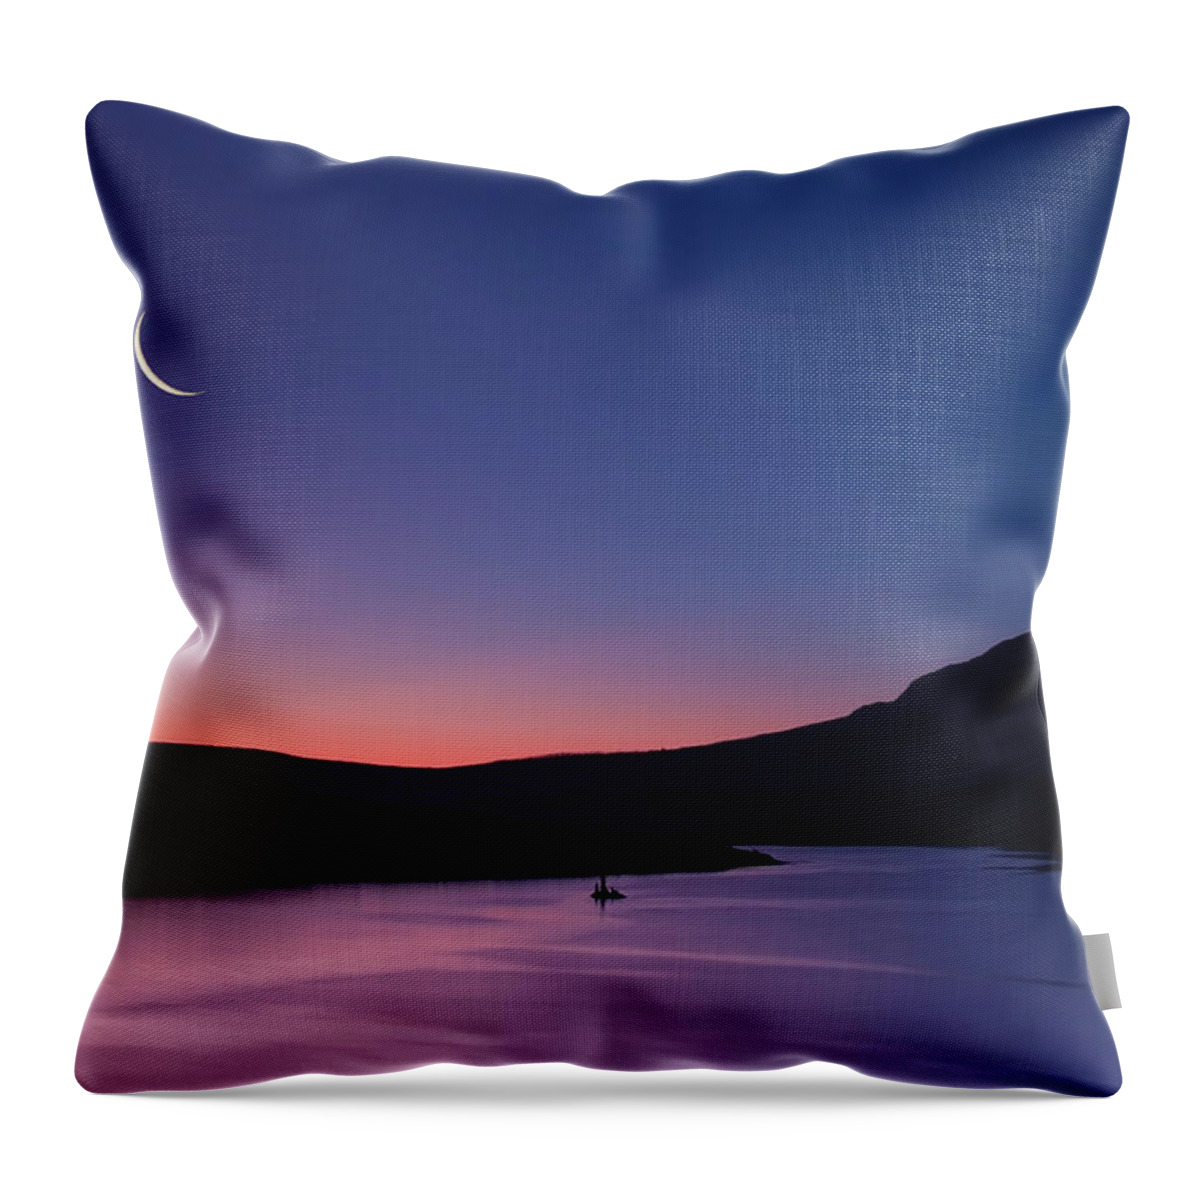 Tranquility Throw Pillow featuring the photograph Clear Skies And The Crescent Moon by Jtbaskinphoto